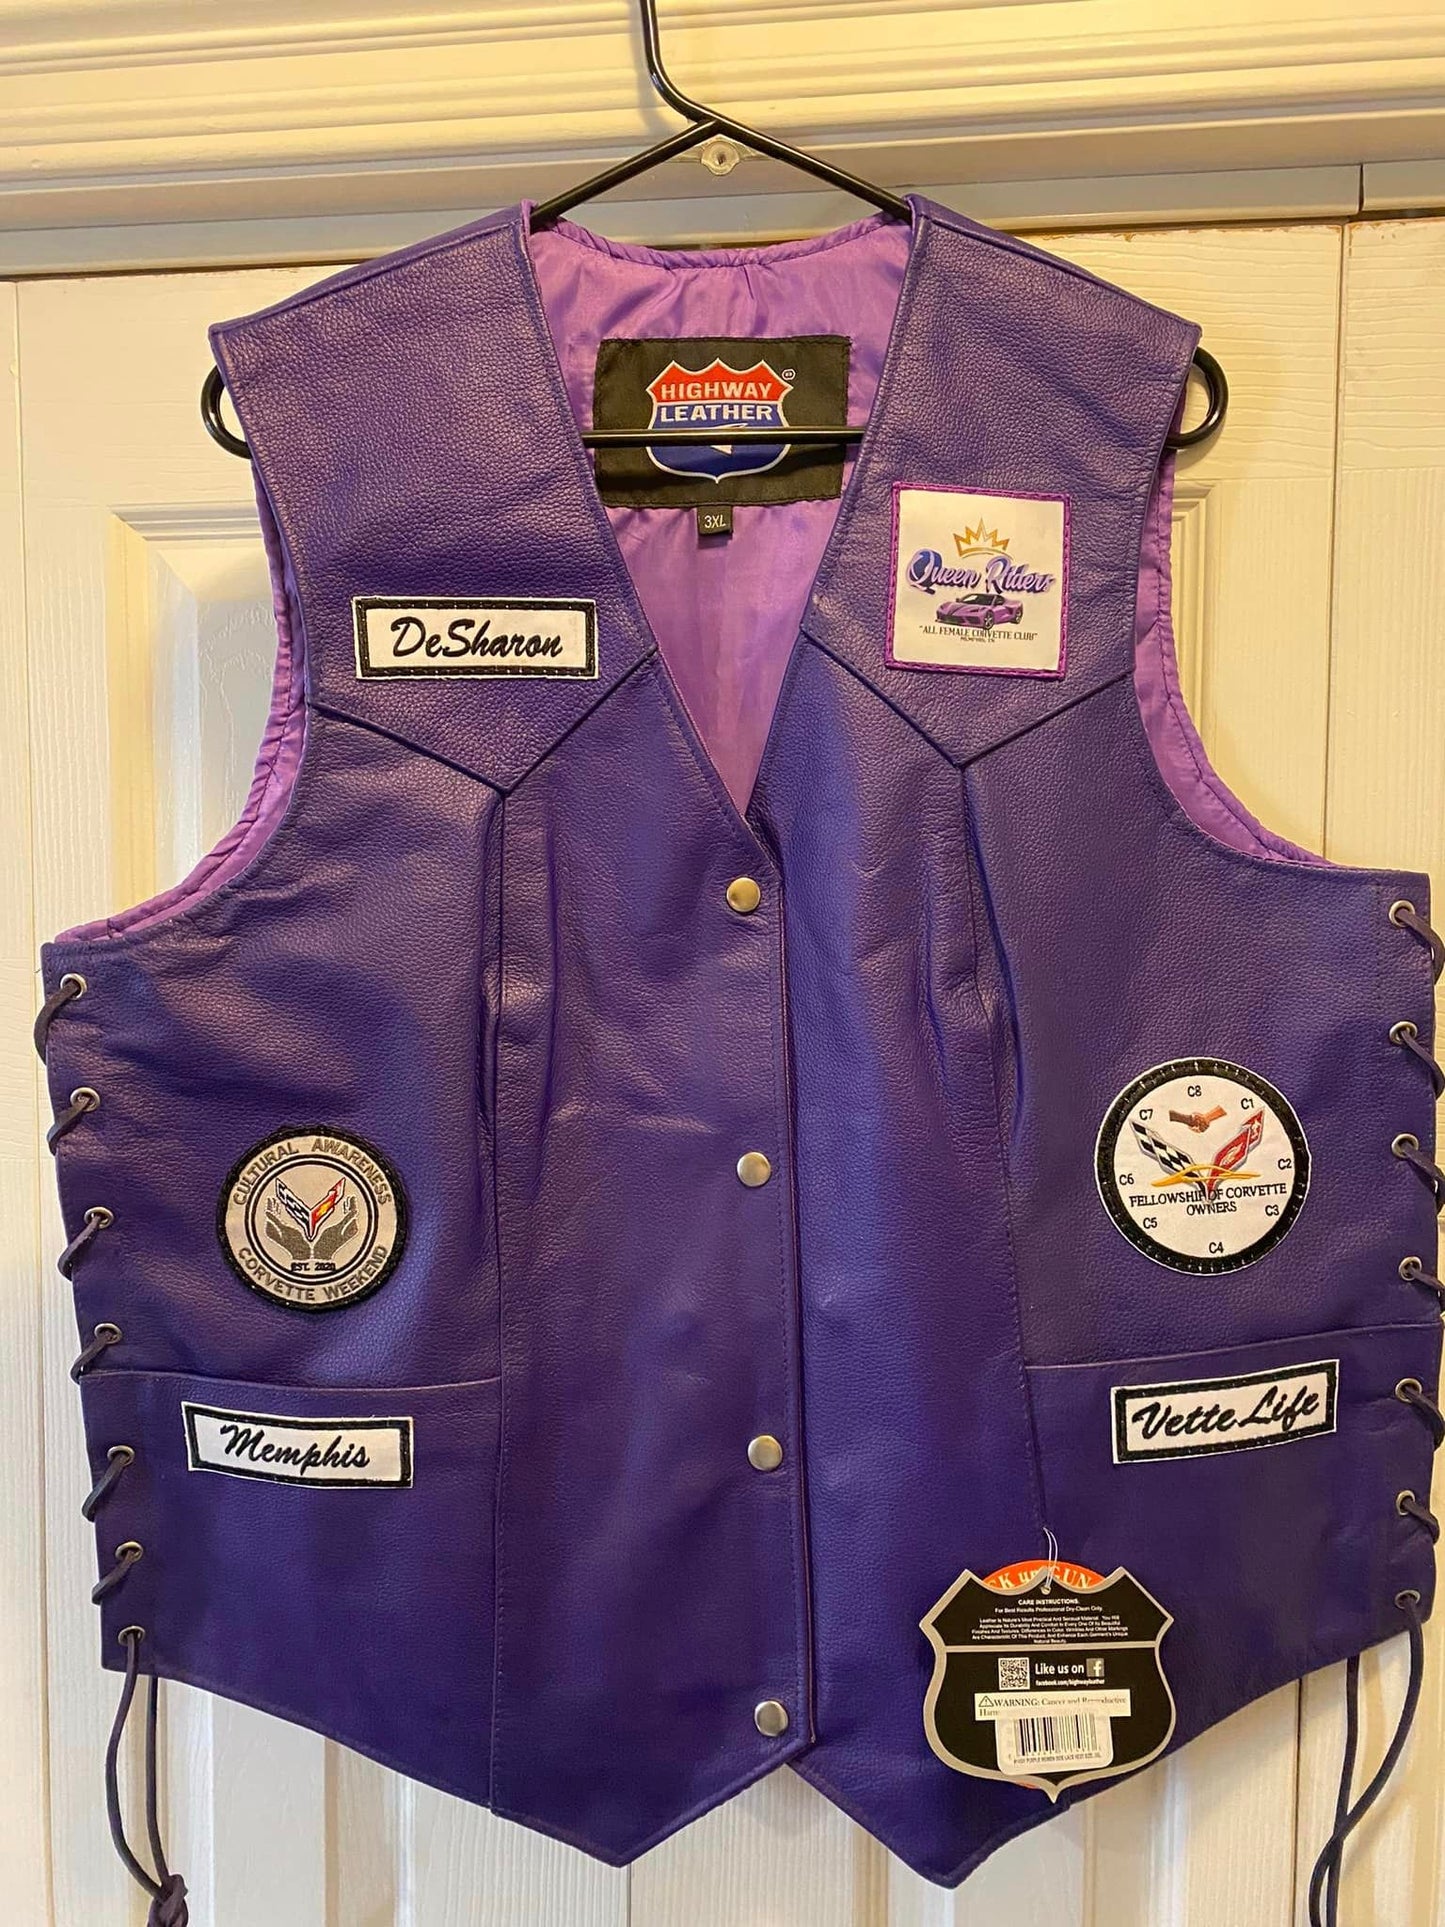 Vest - Queen Riders All Female Corvette Club (Only Available to QR Members)